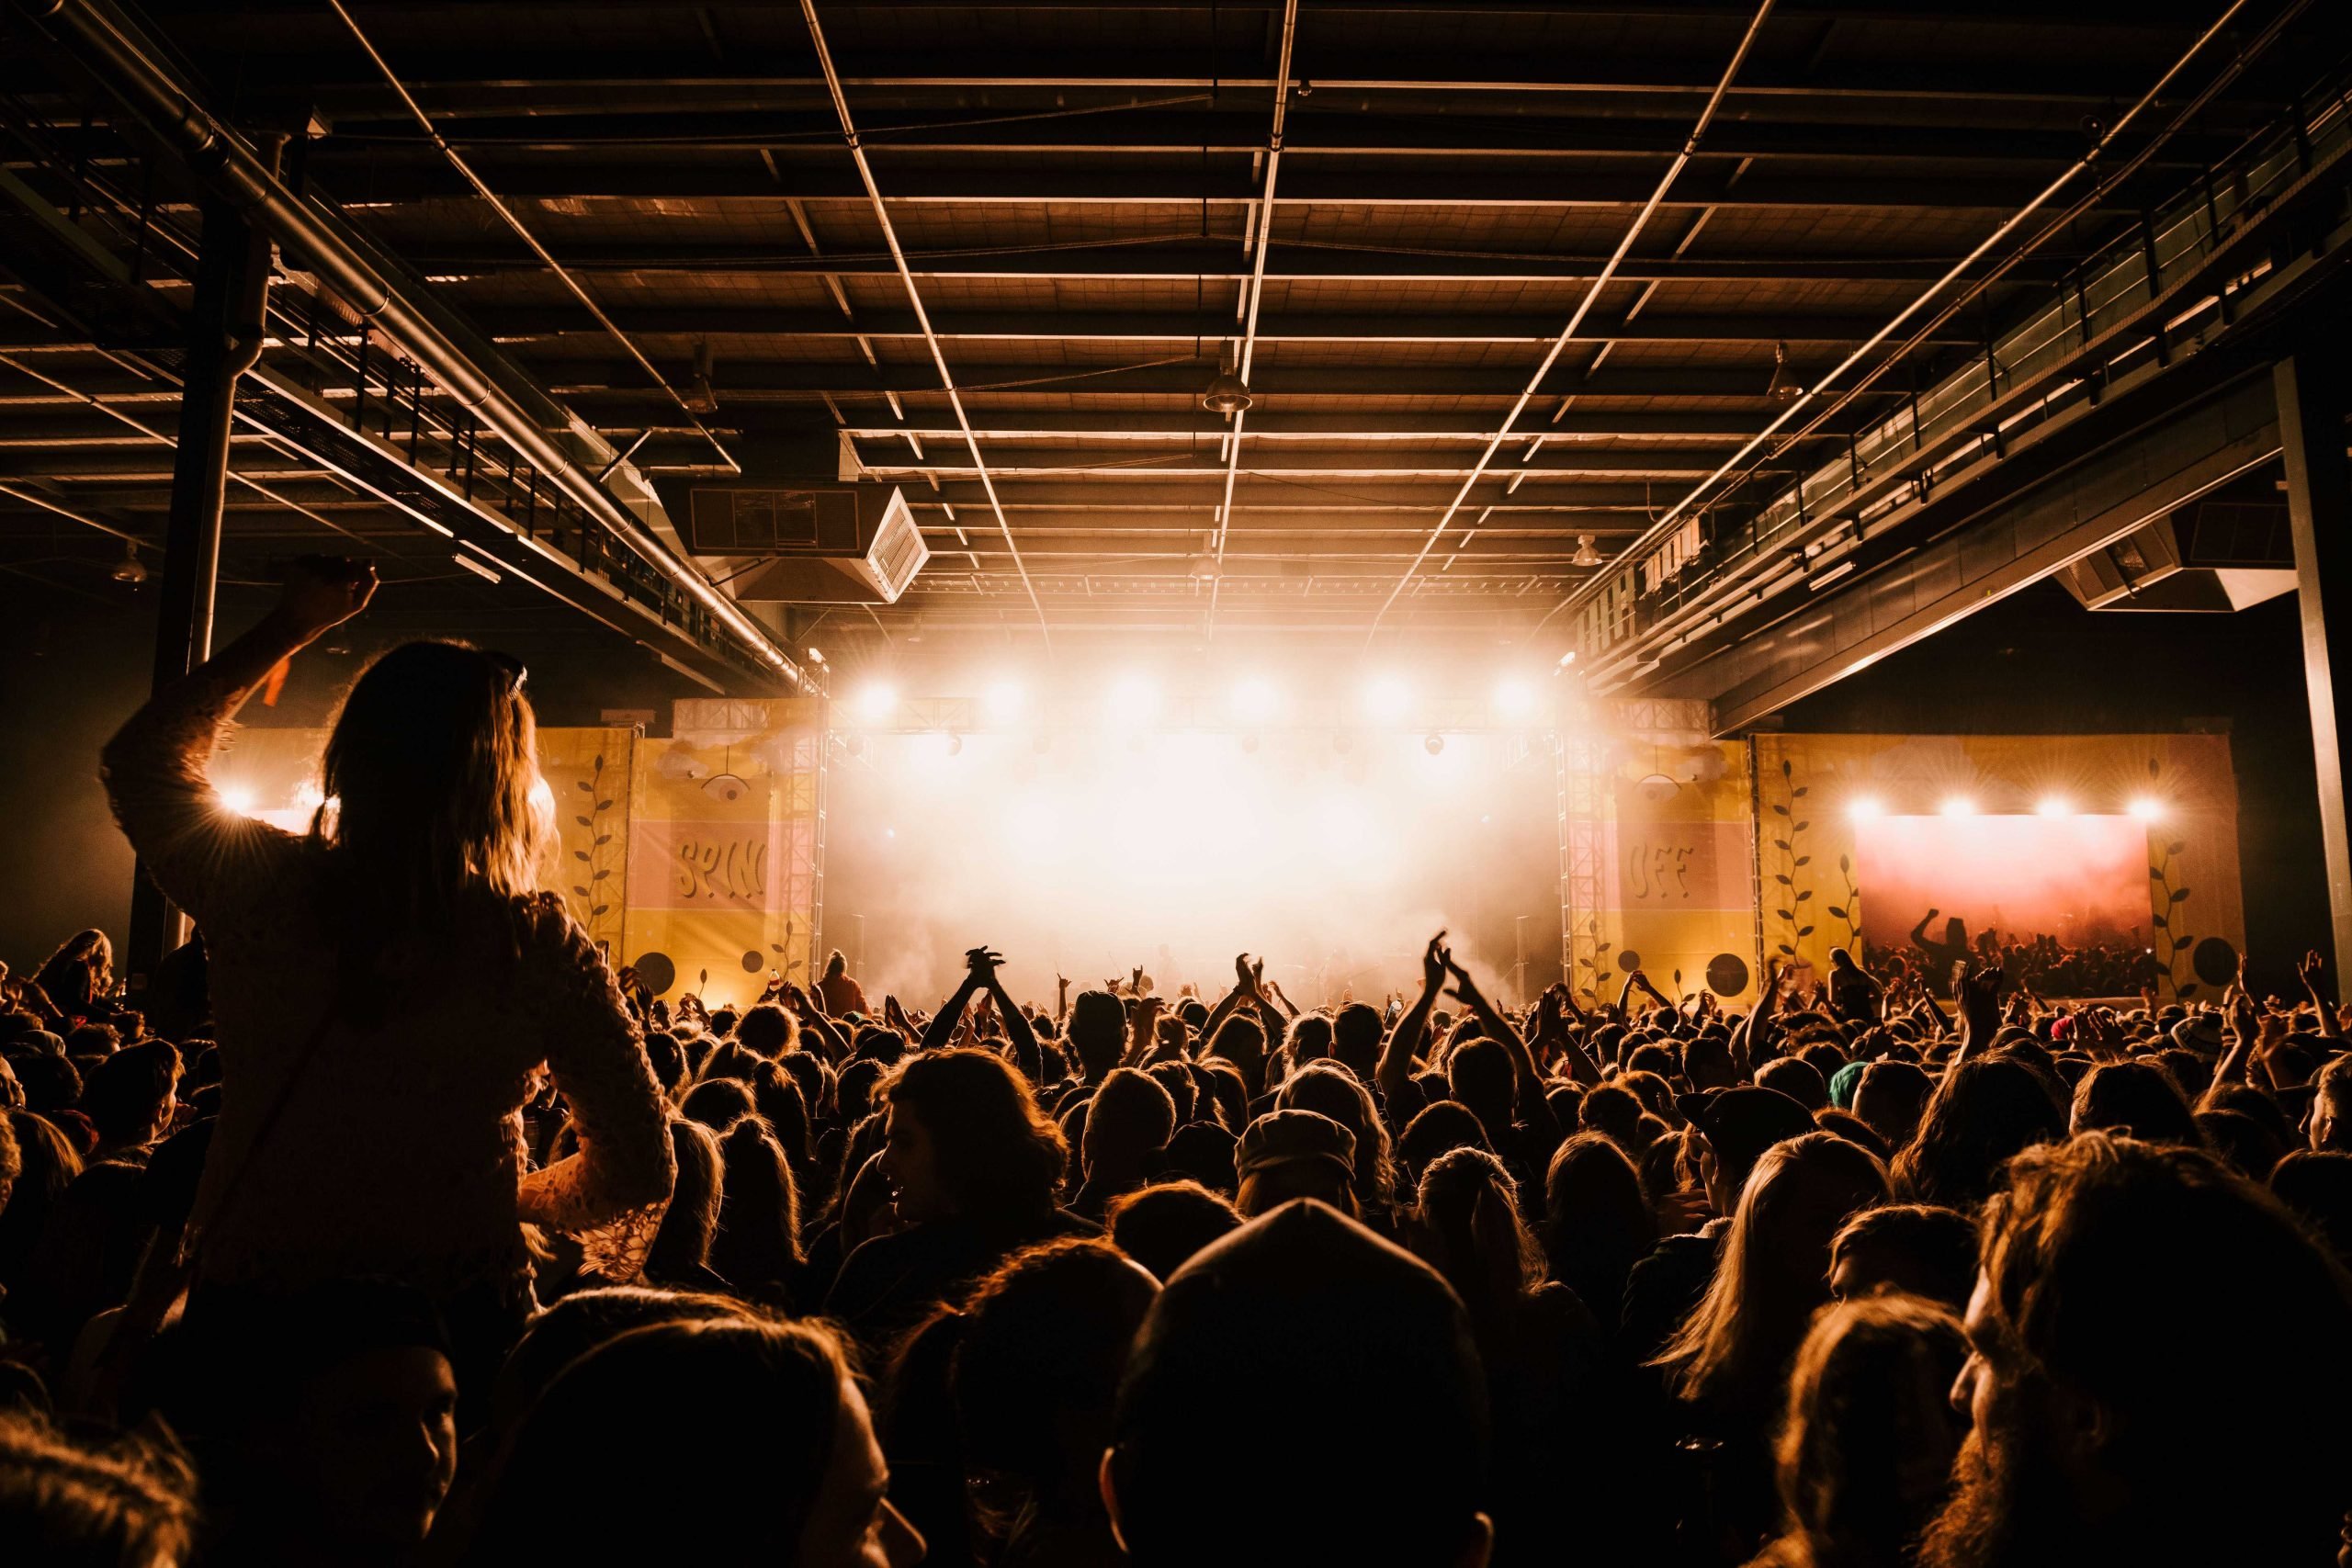 What do music events contribute to the economy?